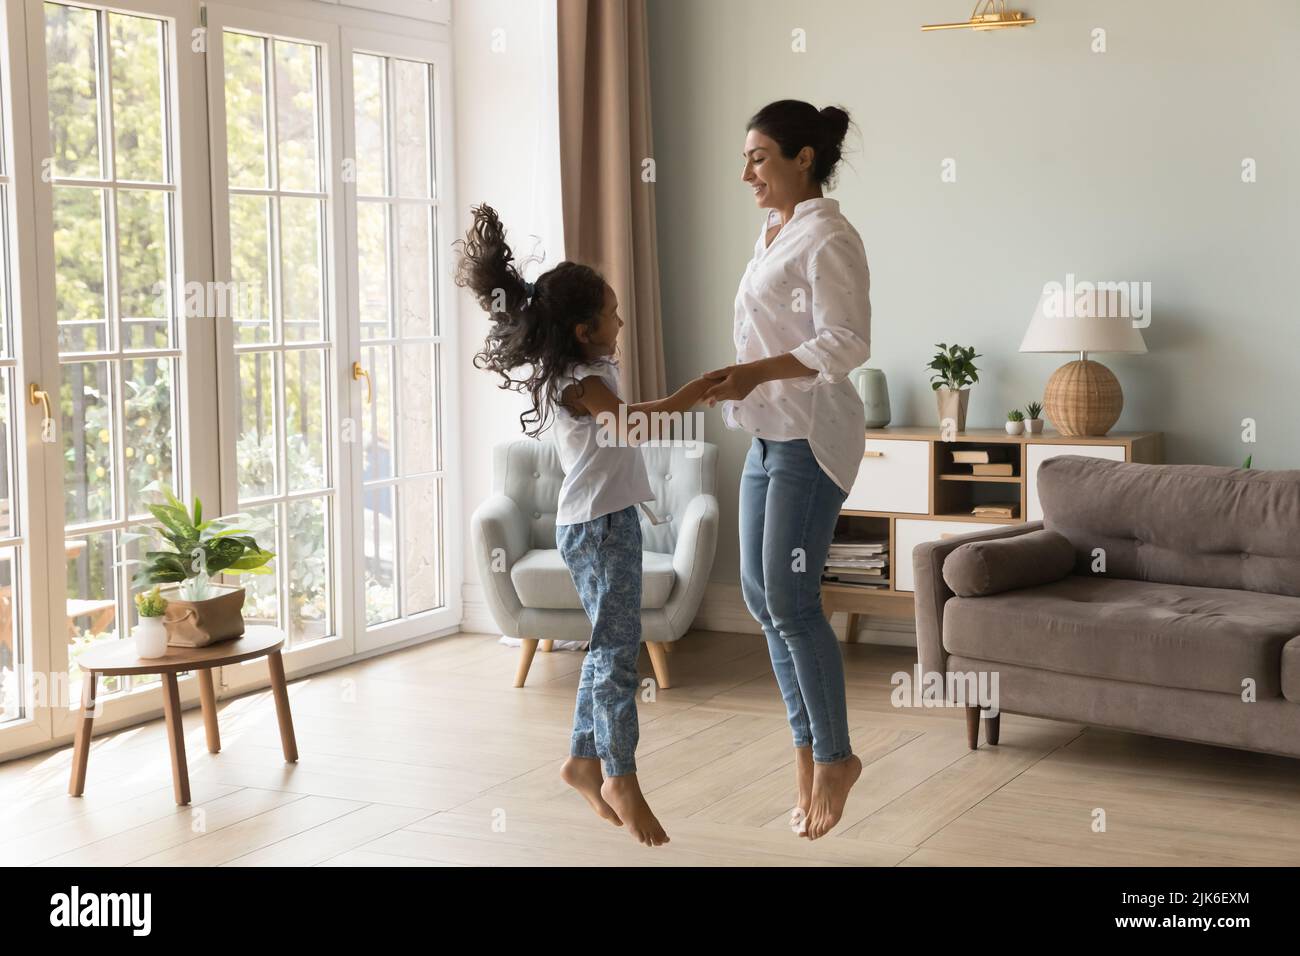 Excited Indian kid and happy mom holding hands Stock Photo